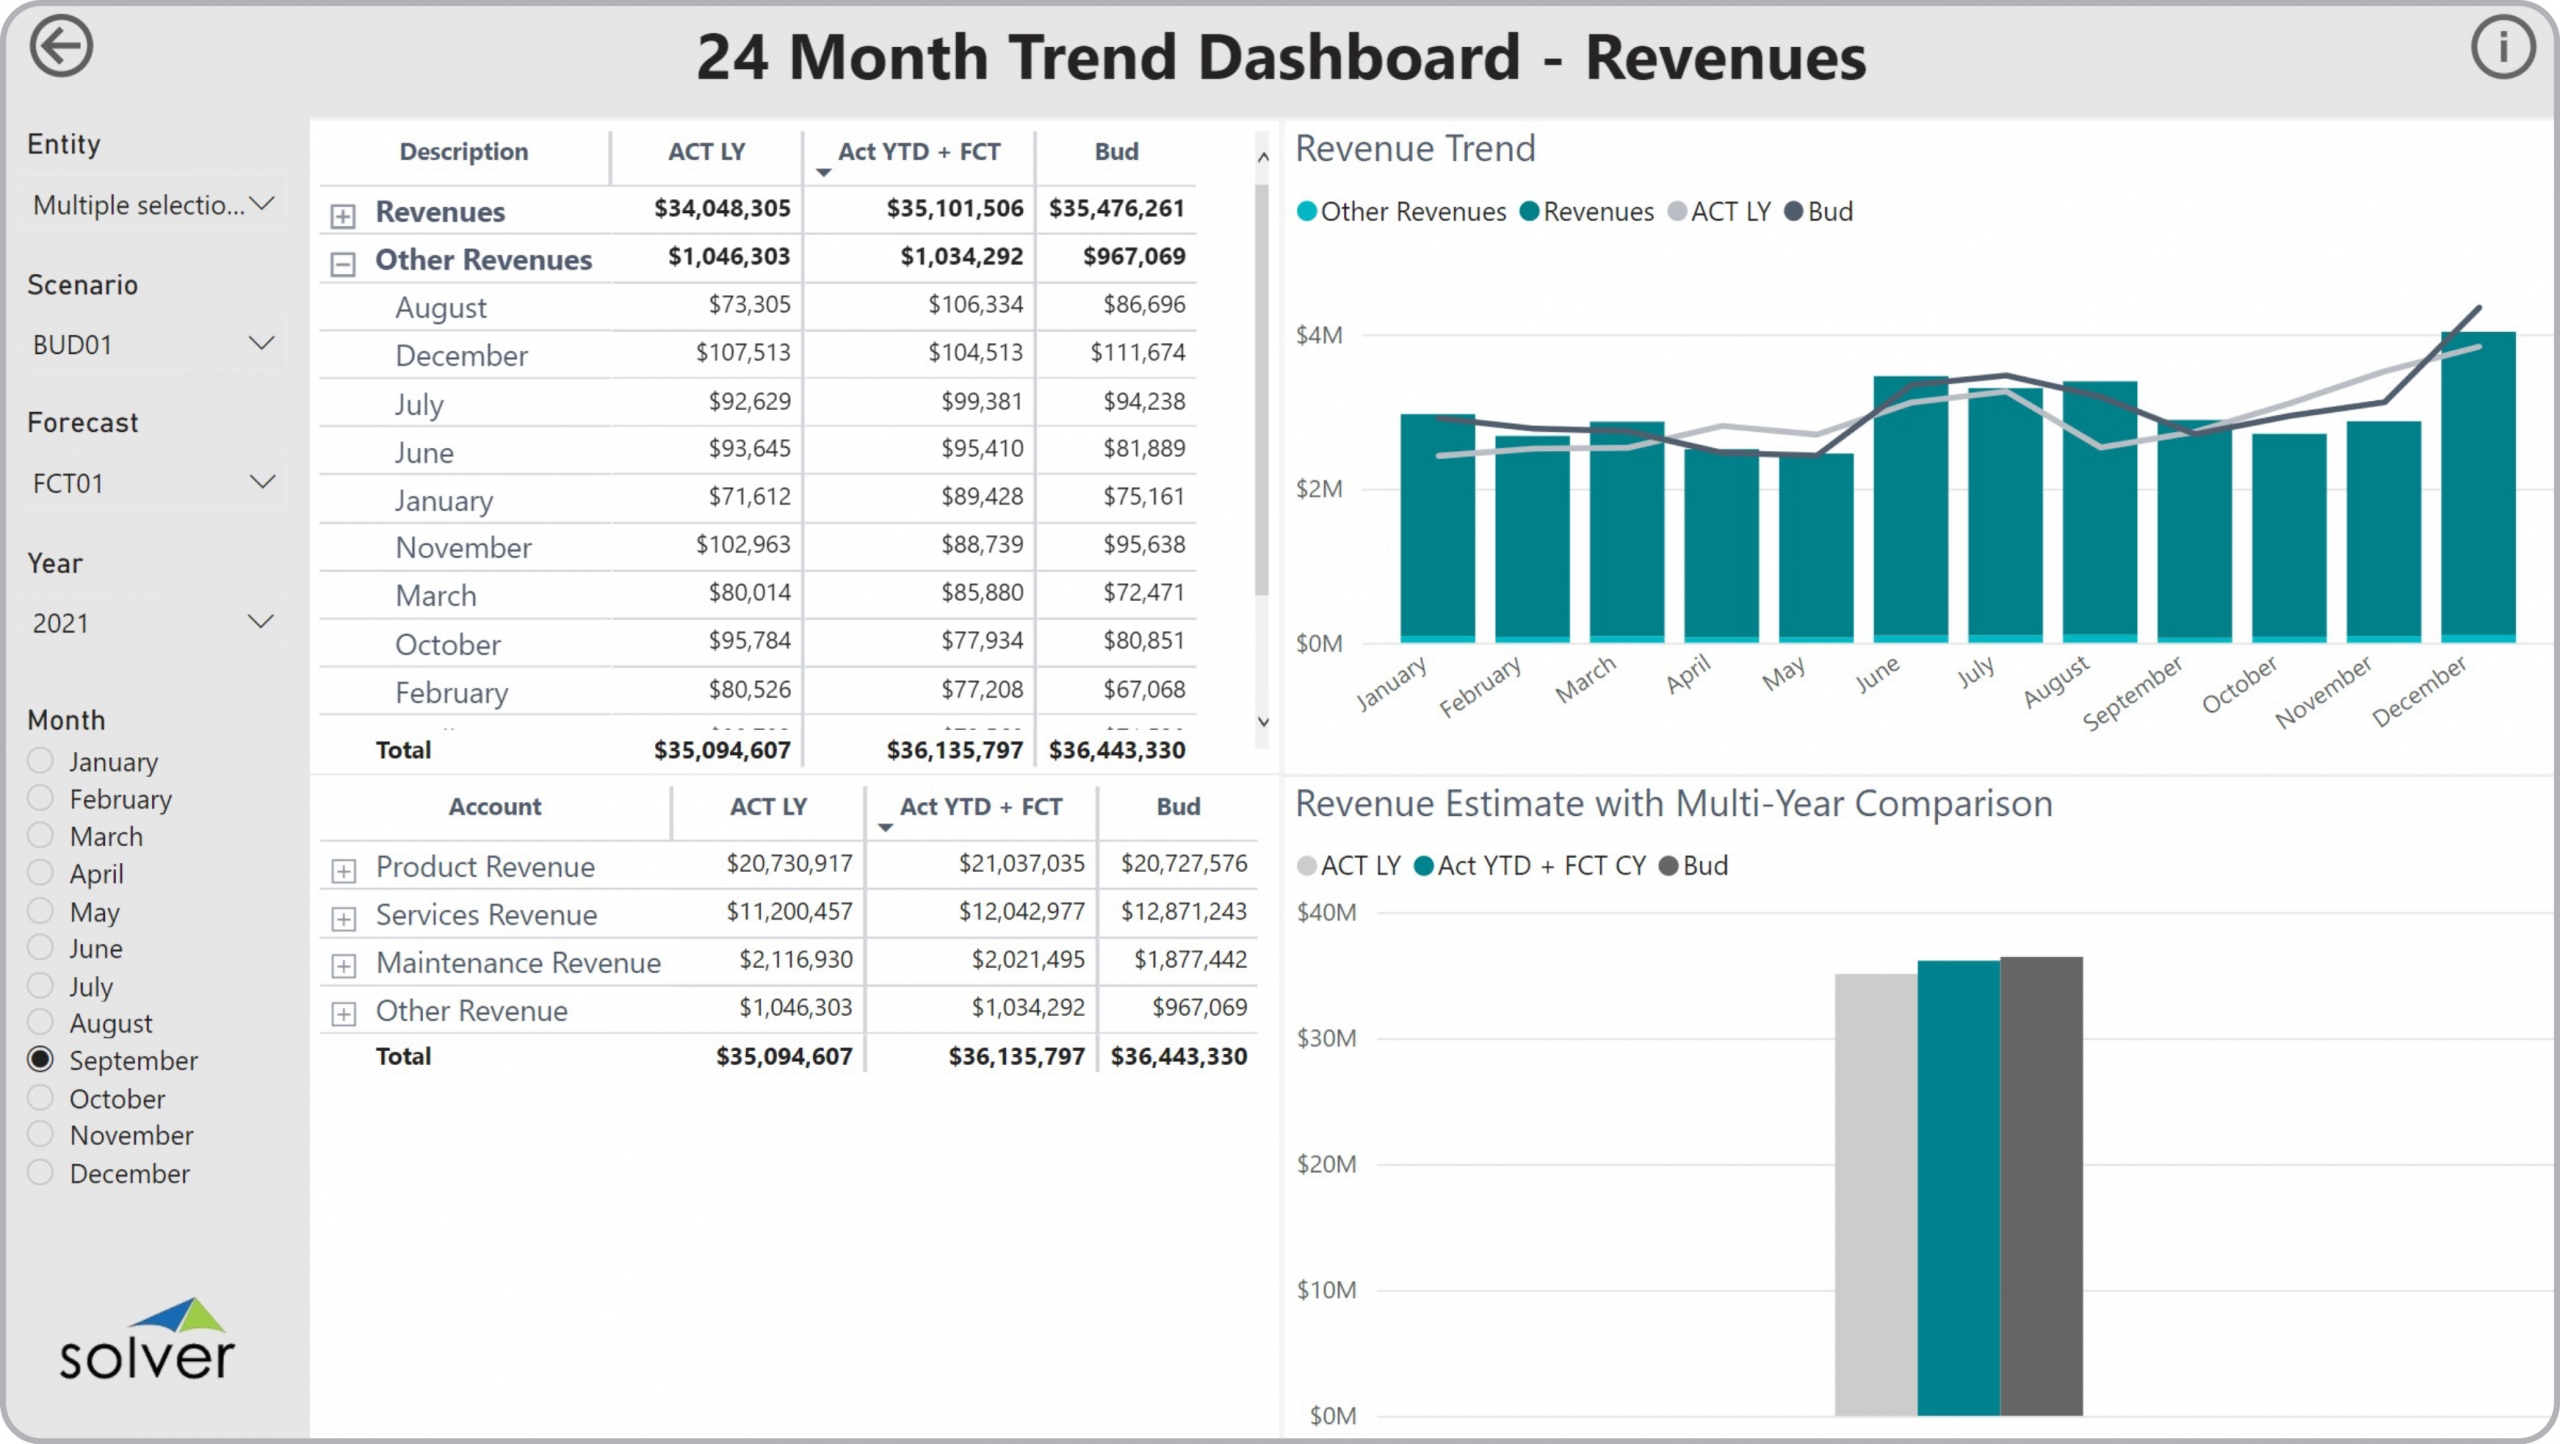 Example of a 24 Month Revenue Trend Dashboard to Streamline the Monthly Reporting Process